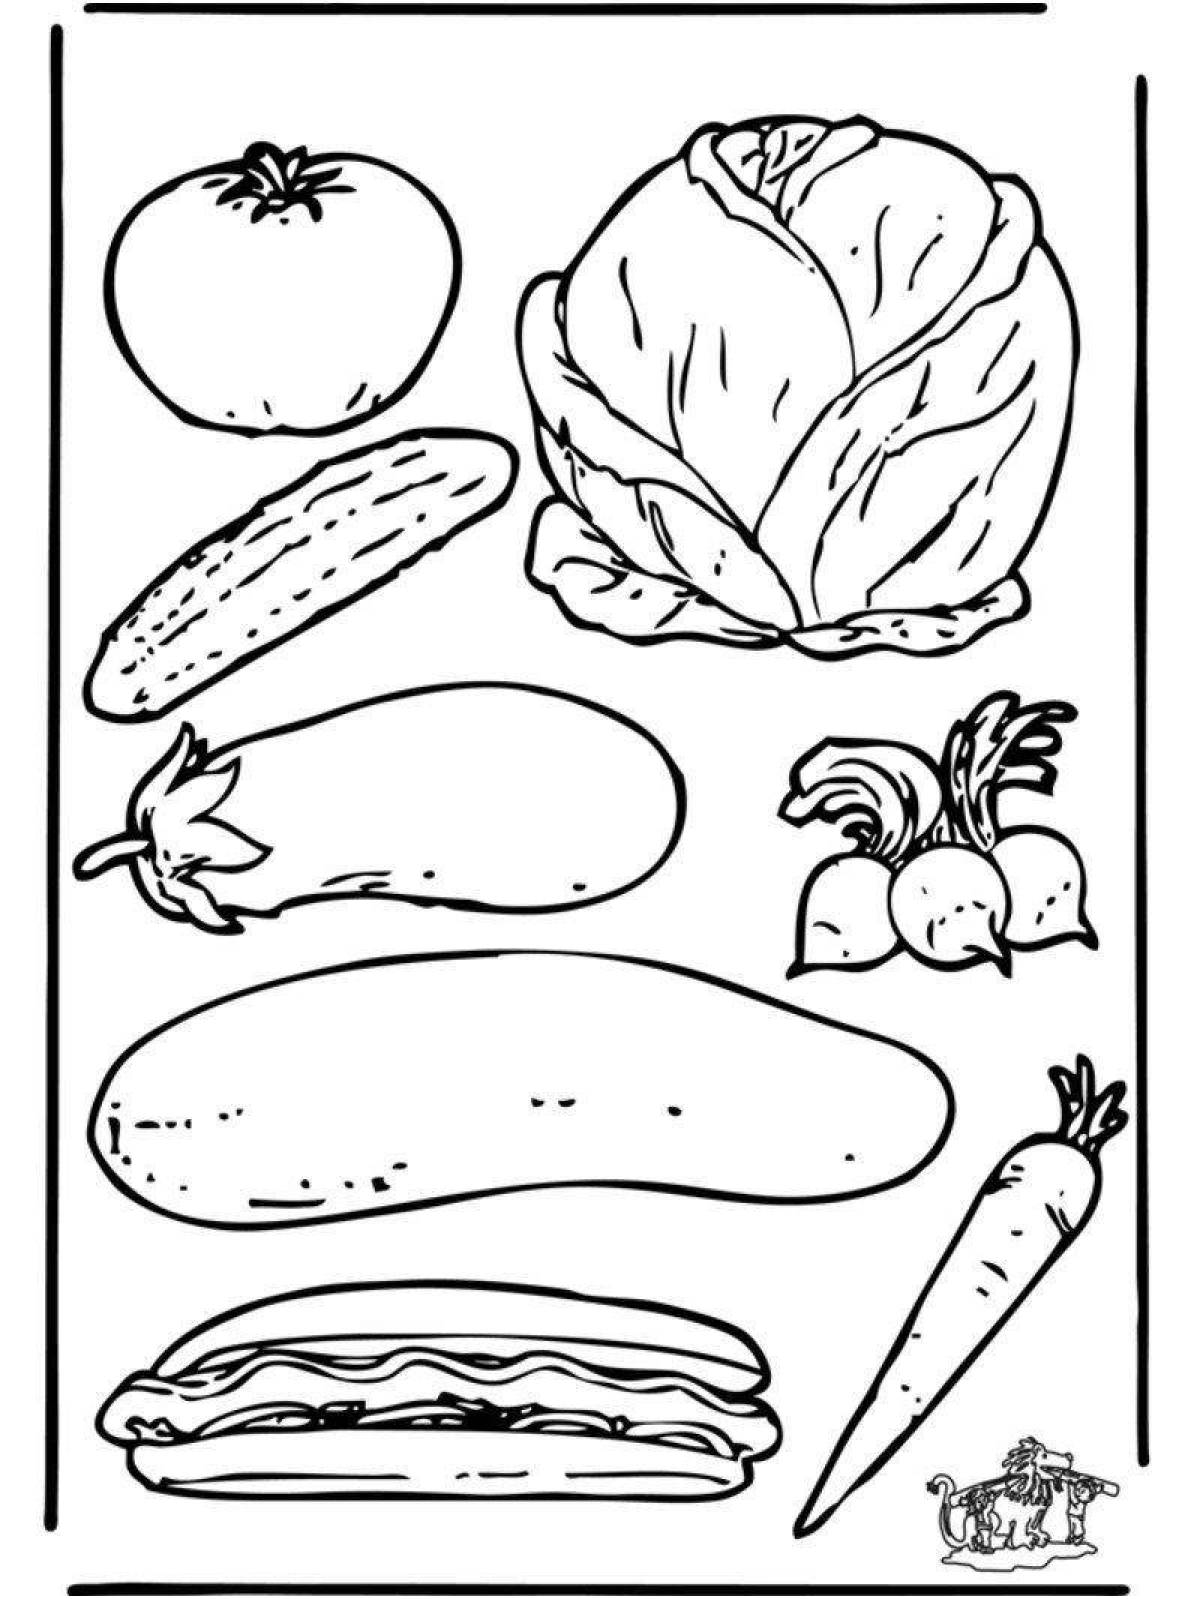 Fun coloring book for kids 2-3 years old vegetables